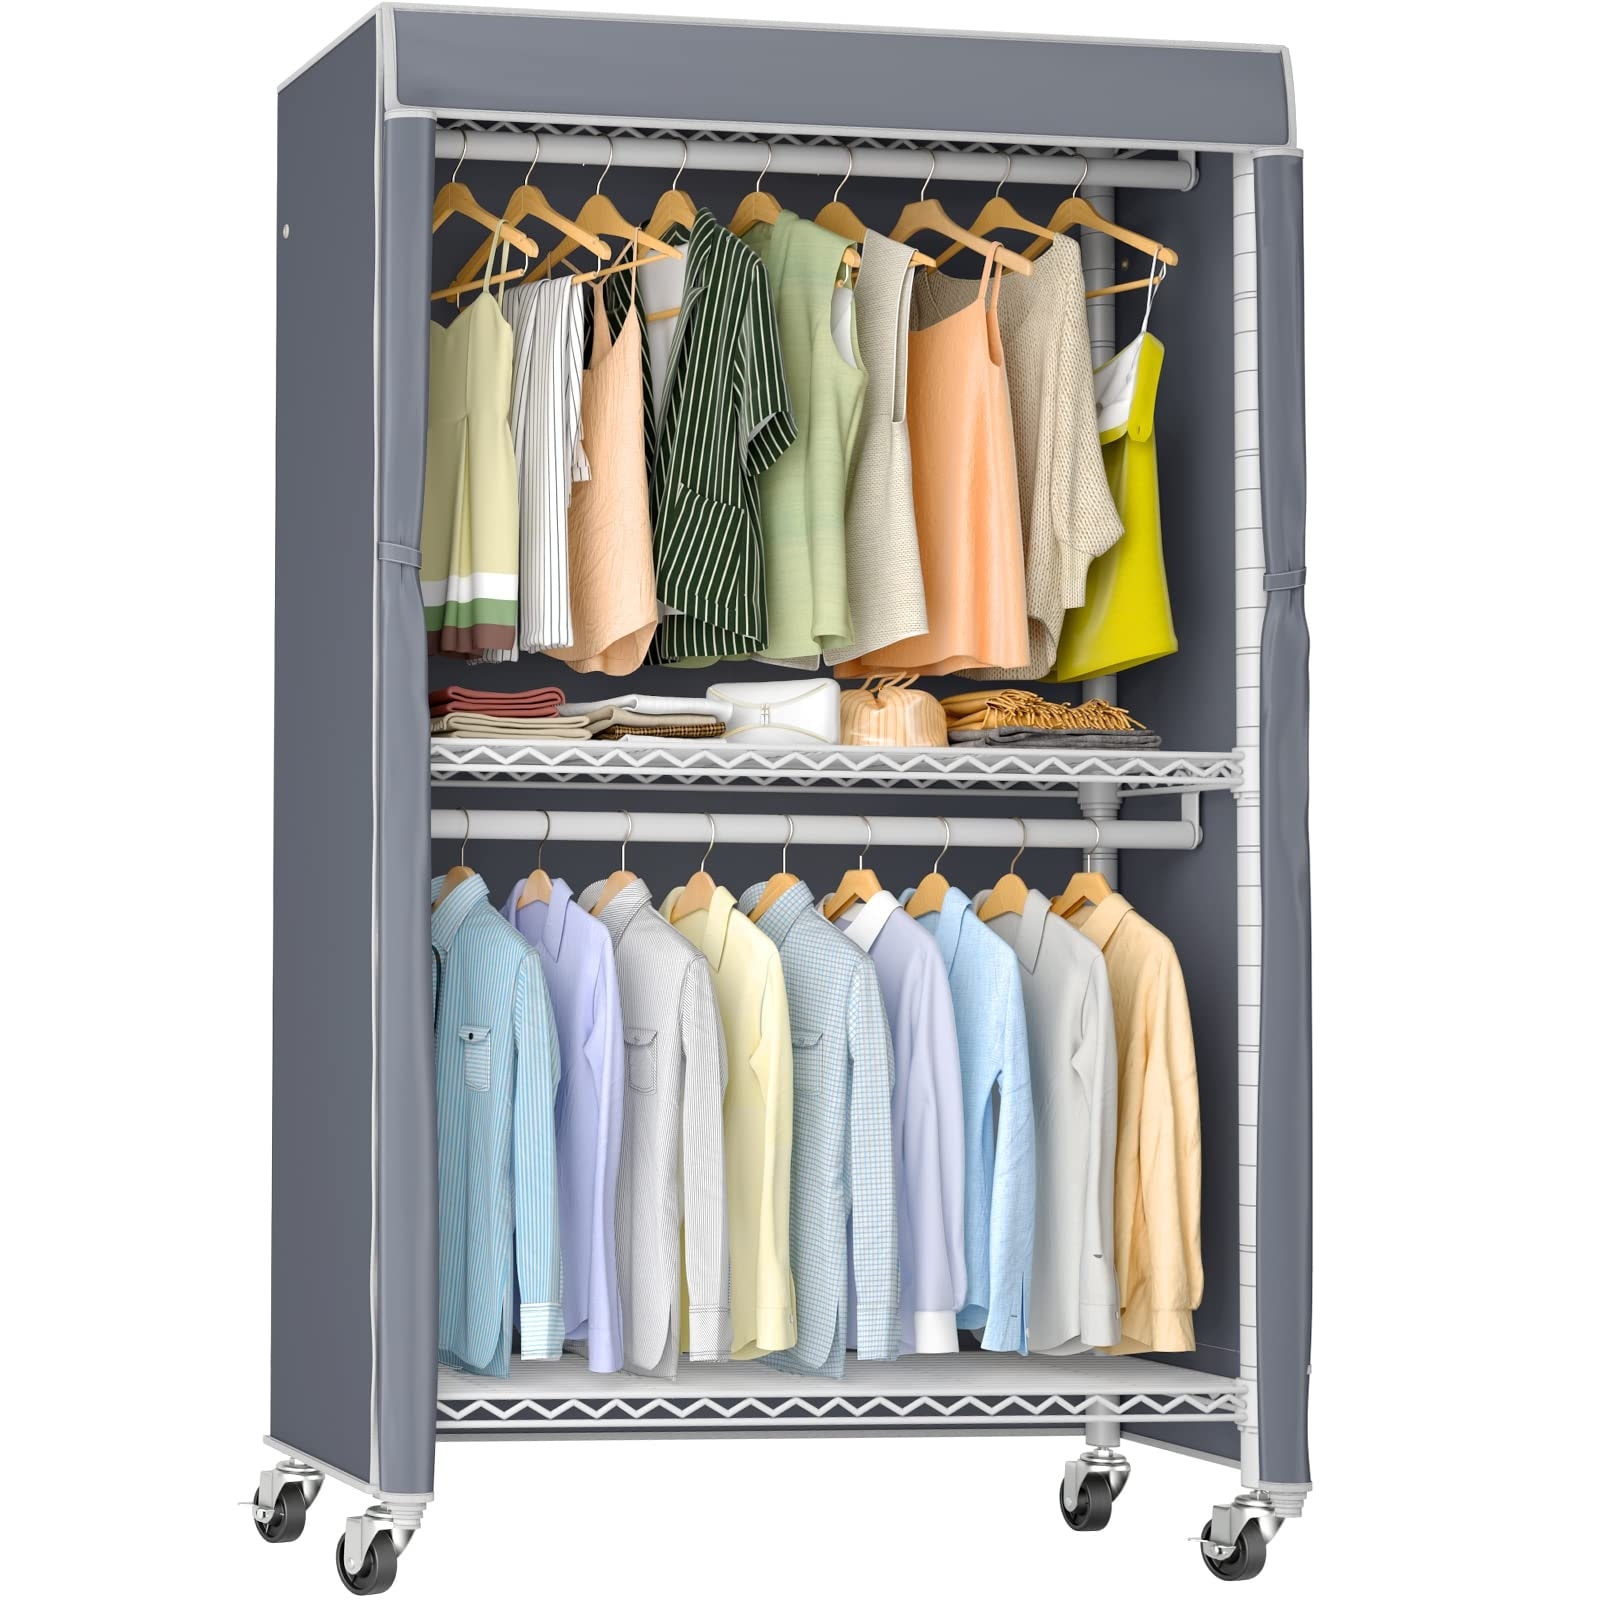 https://ak1.ostkcdn.com/images/products/is/images/direct/80636a0c155c54eeba37f3939f7466ee55fb26a2/Rolling-Garment-Rack-with-Cover-Clothing-Rack%2C-Closets-with-Adjustable-3-Wire-Shelving-and-Double-Rods%2C-Wardrobe-on-Wheels.jpg